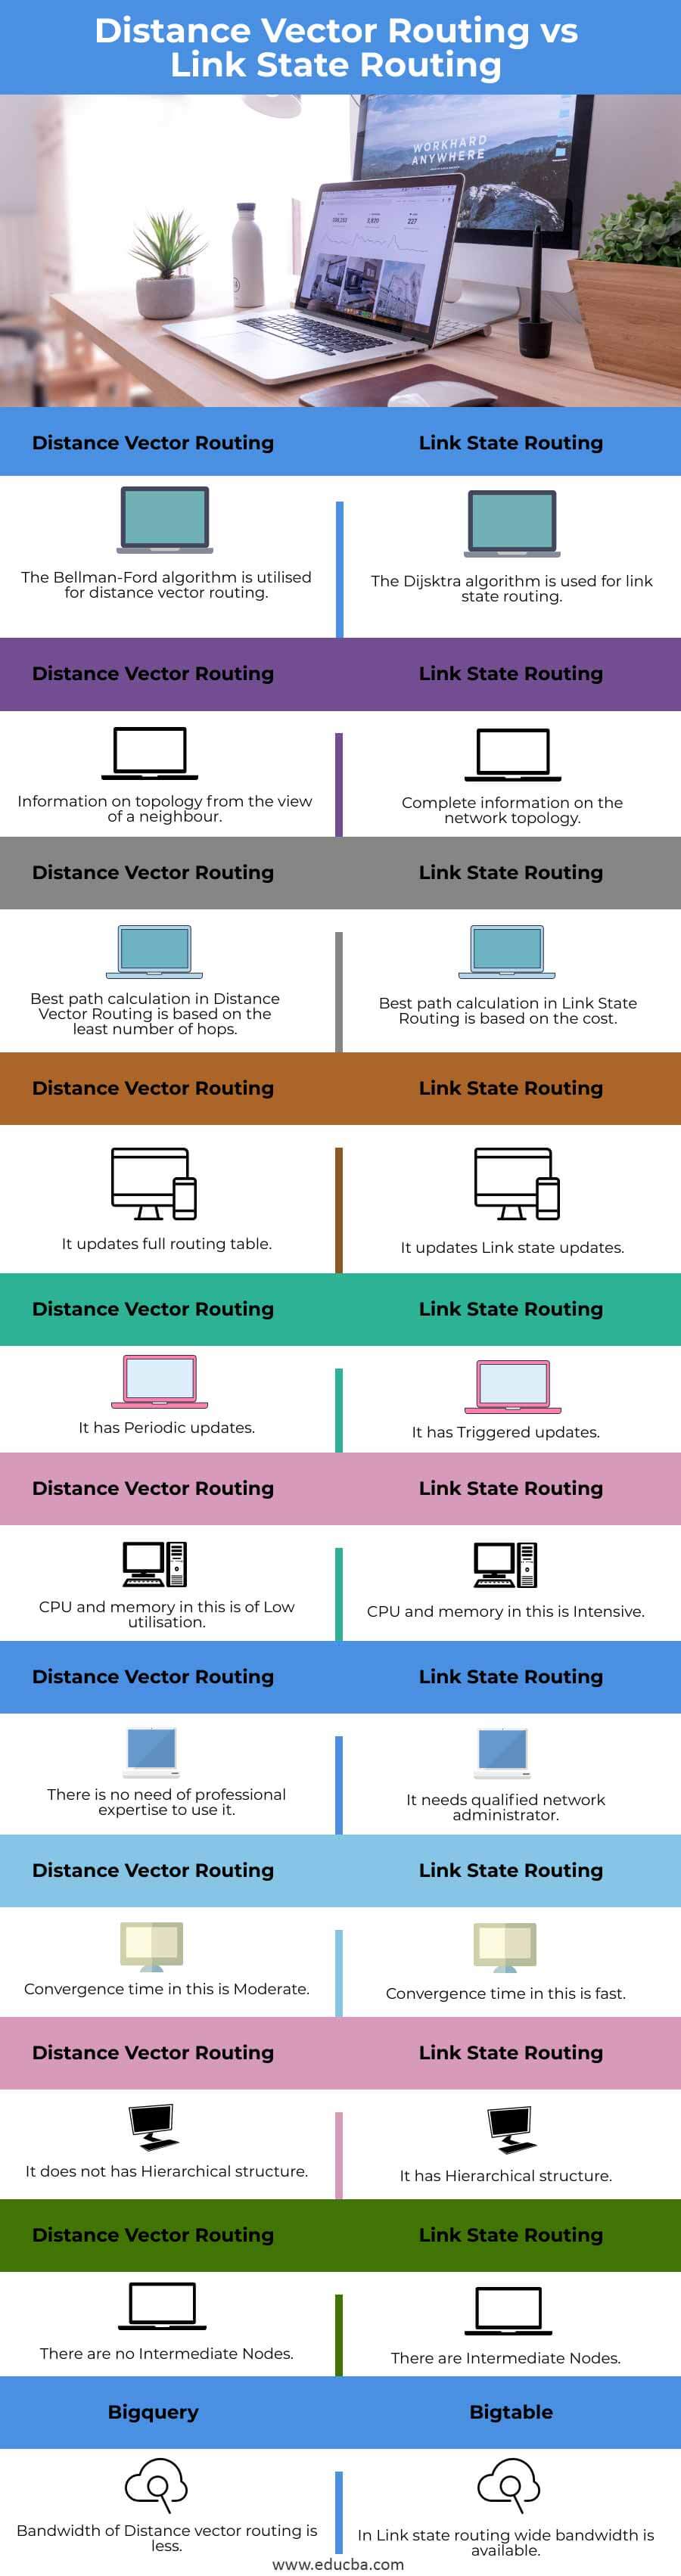 Distance-Vector-Routing-vs-Link-State-Routing-info